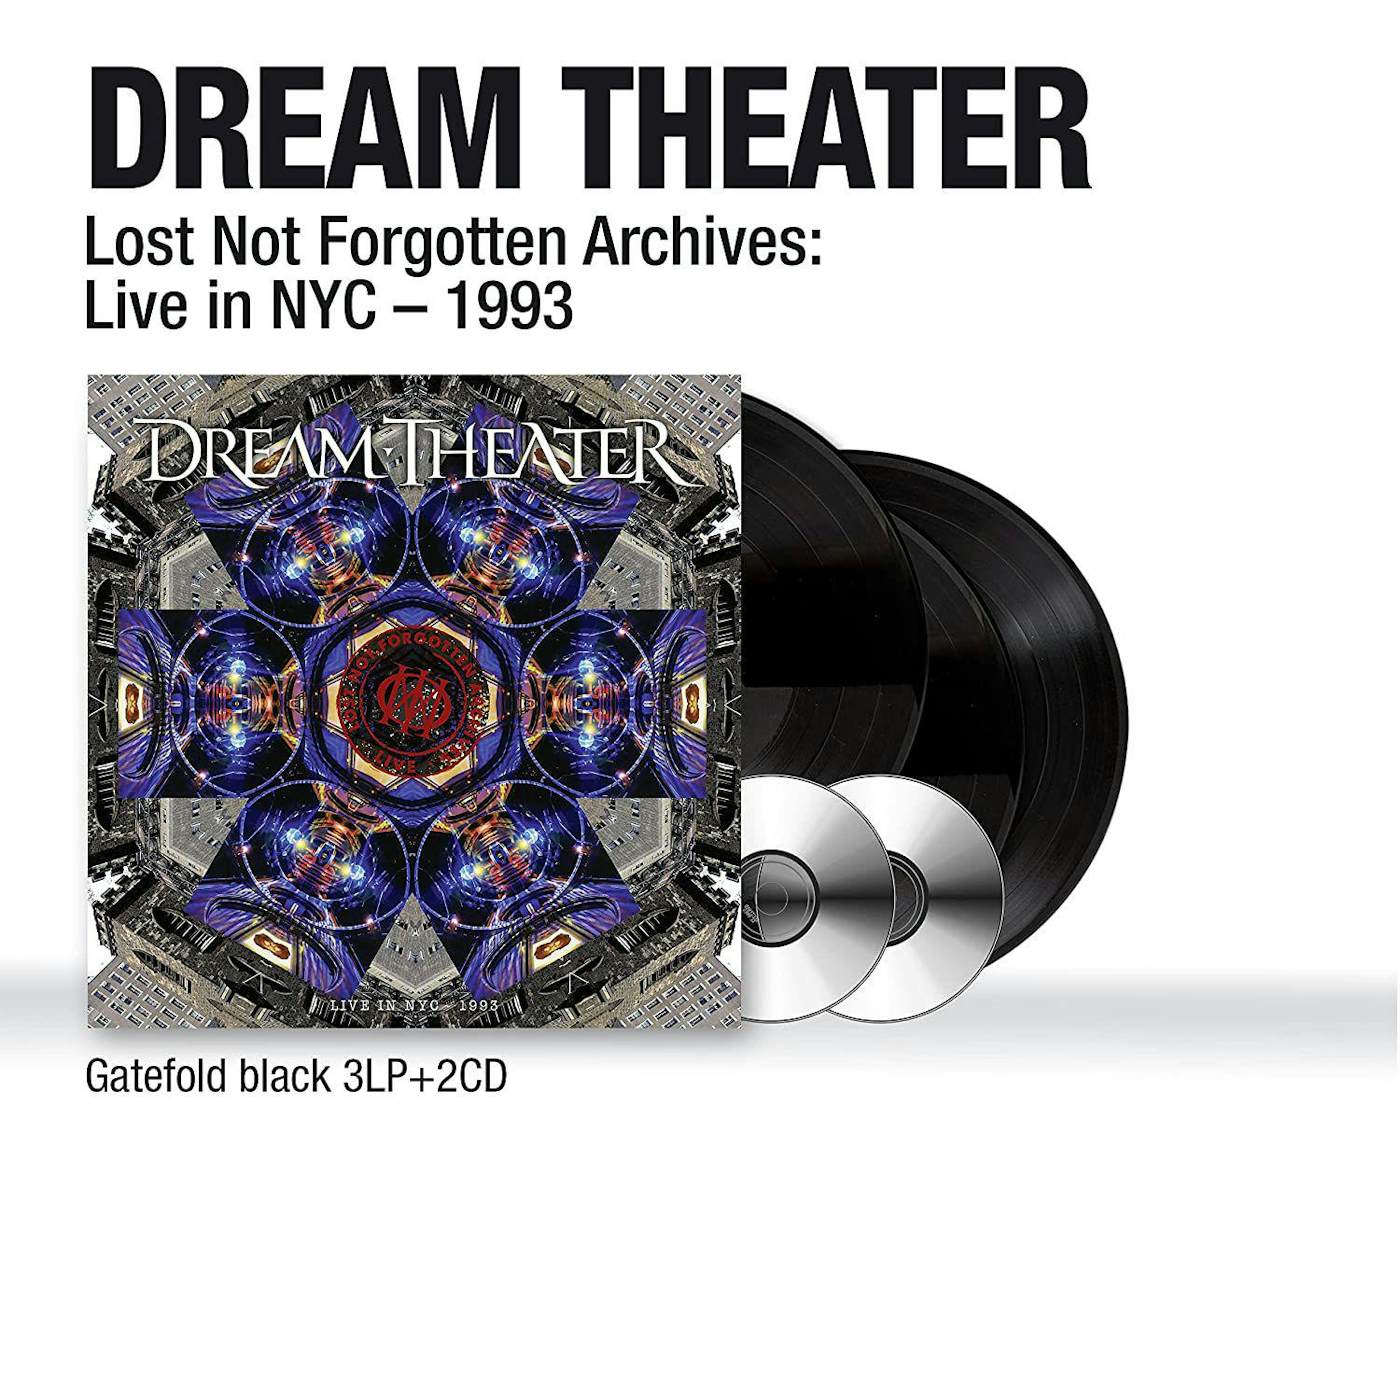 Dream Theater Lost Not Forgotten Archives: Live In NYC - 1993 Vinyl Record